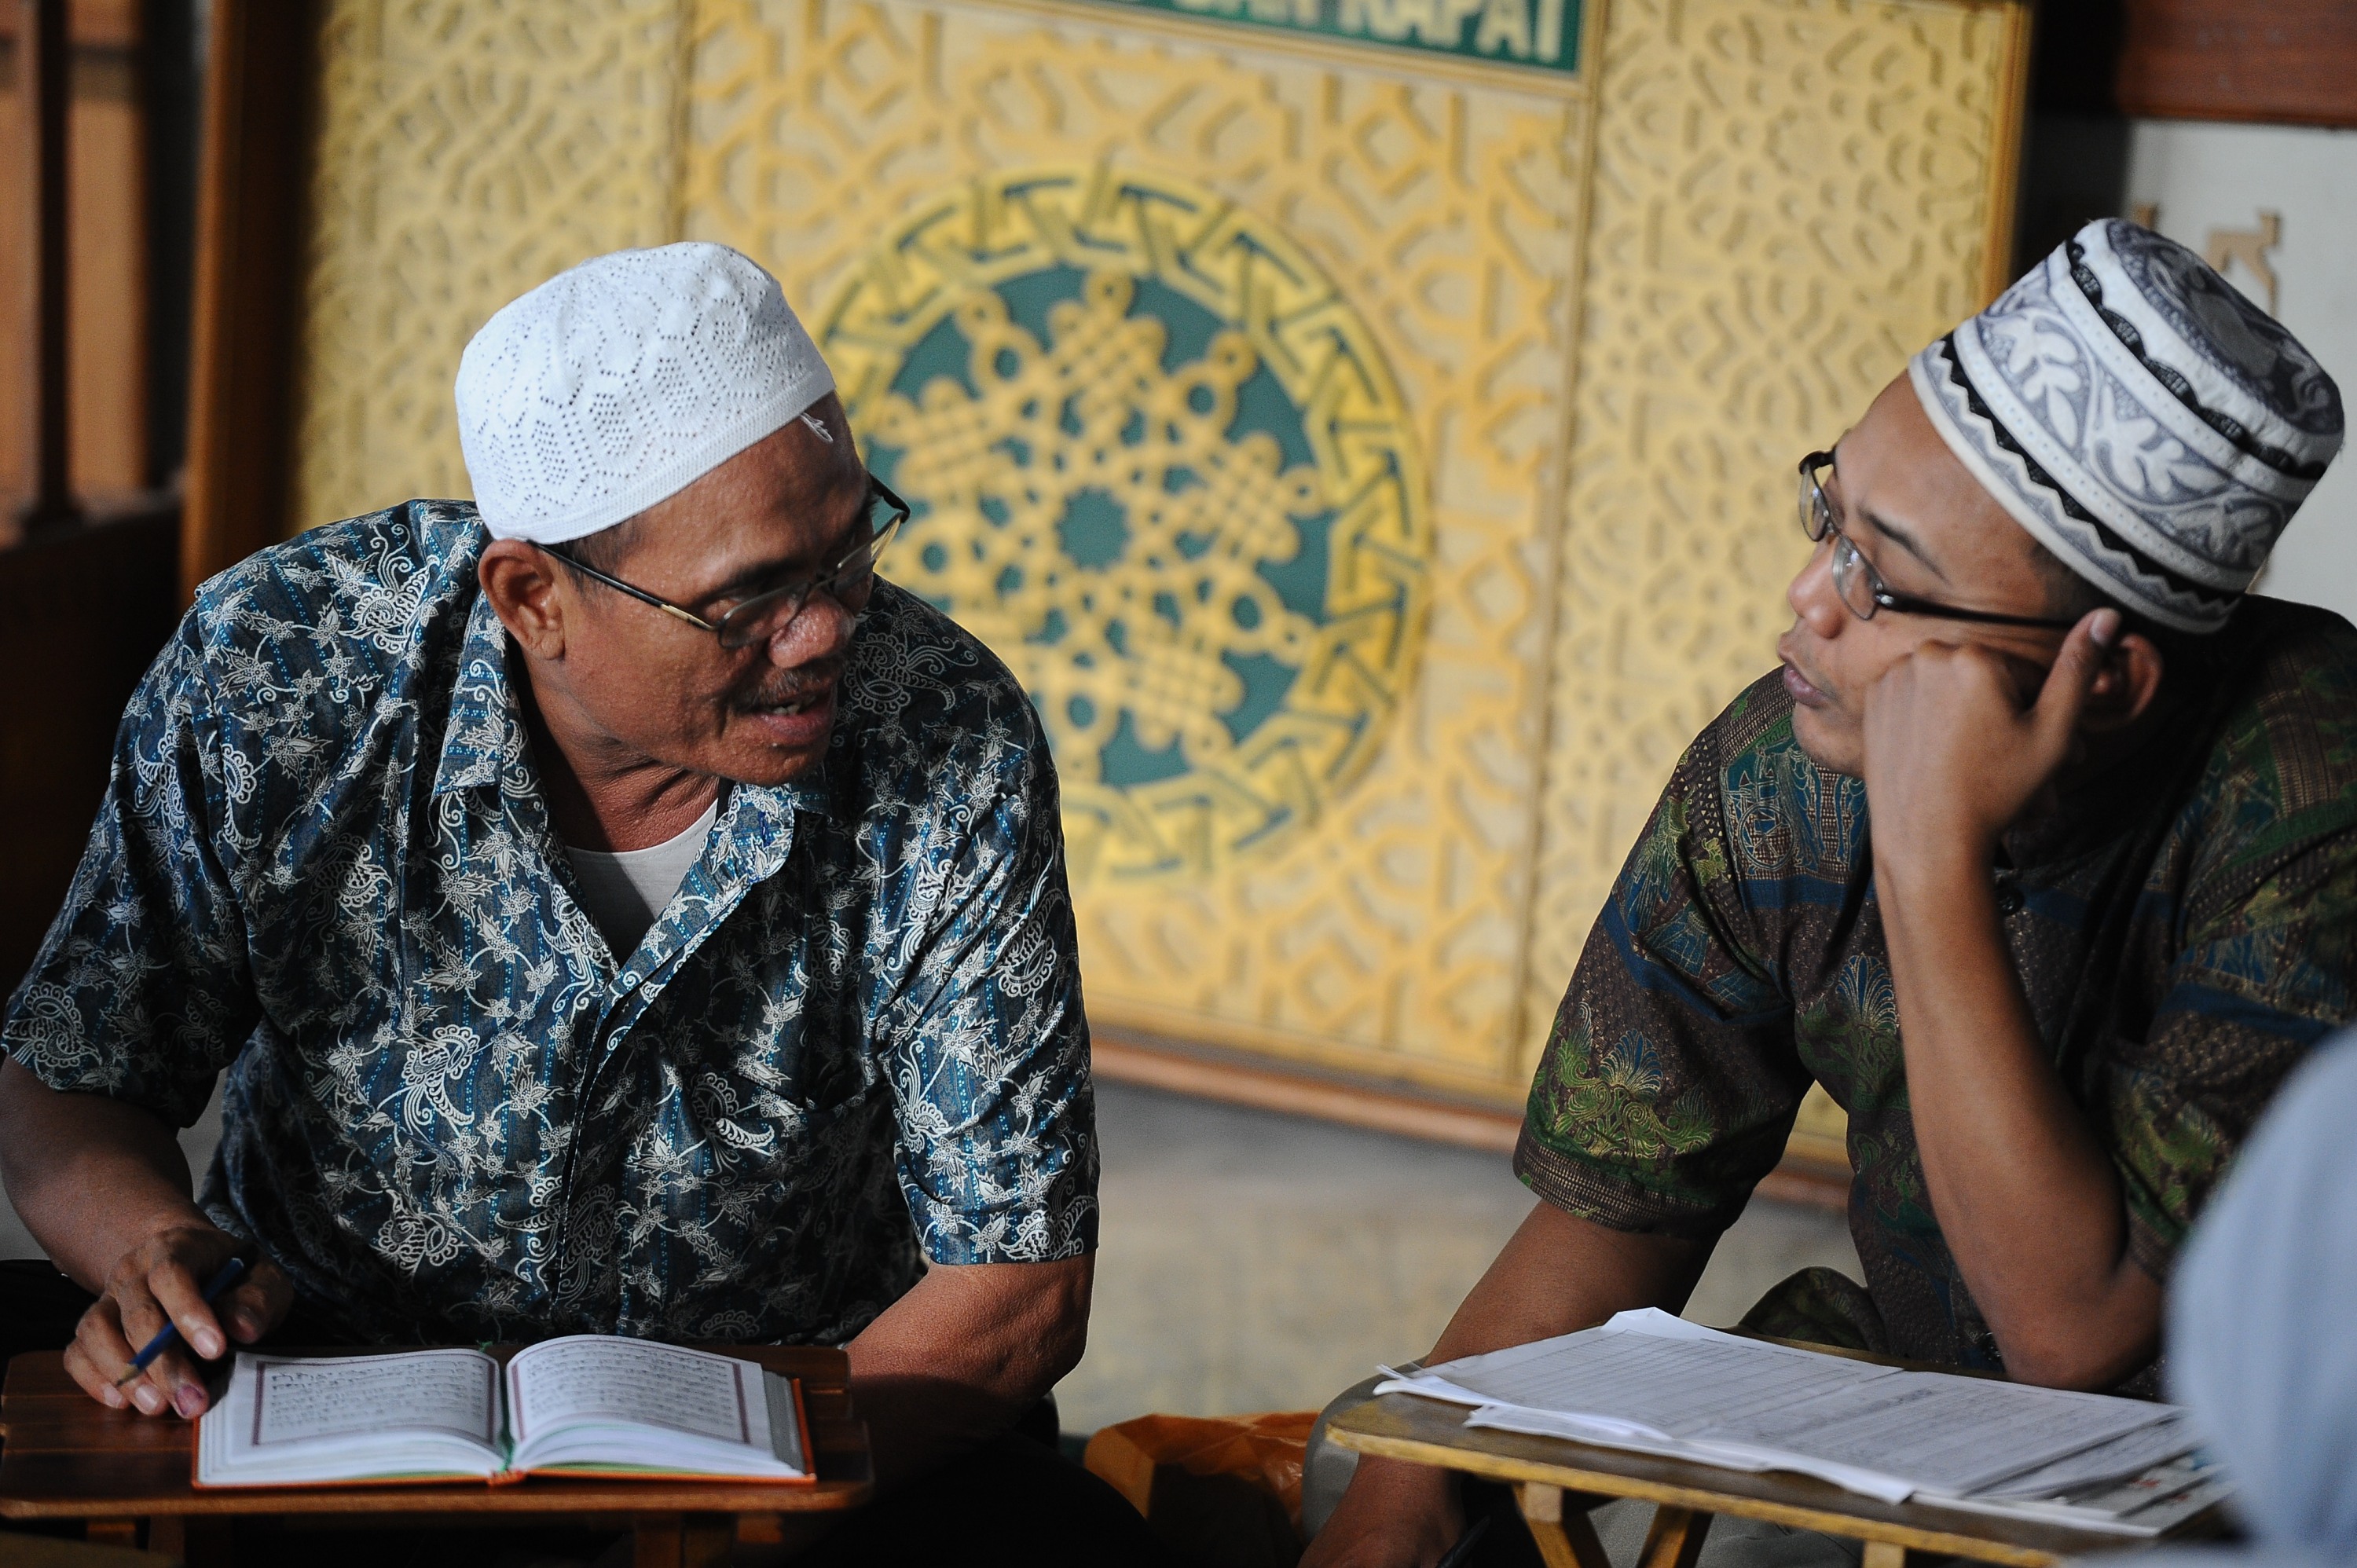 Muslim men read the Quran as they wait for the breaking of the fast during Ramadan on July 13, 2014 in Surabaya, Indonesia. (Robertus Pudyanto&mdash;Getty Images)